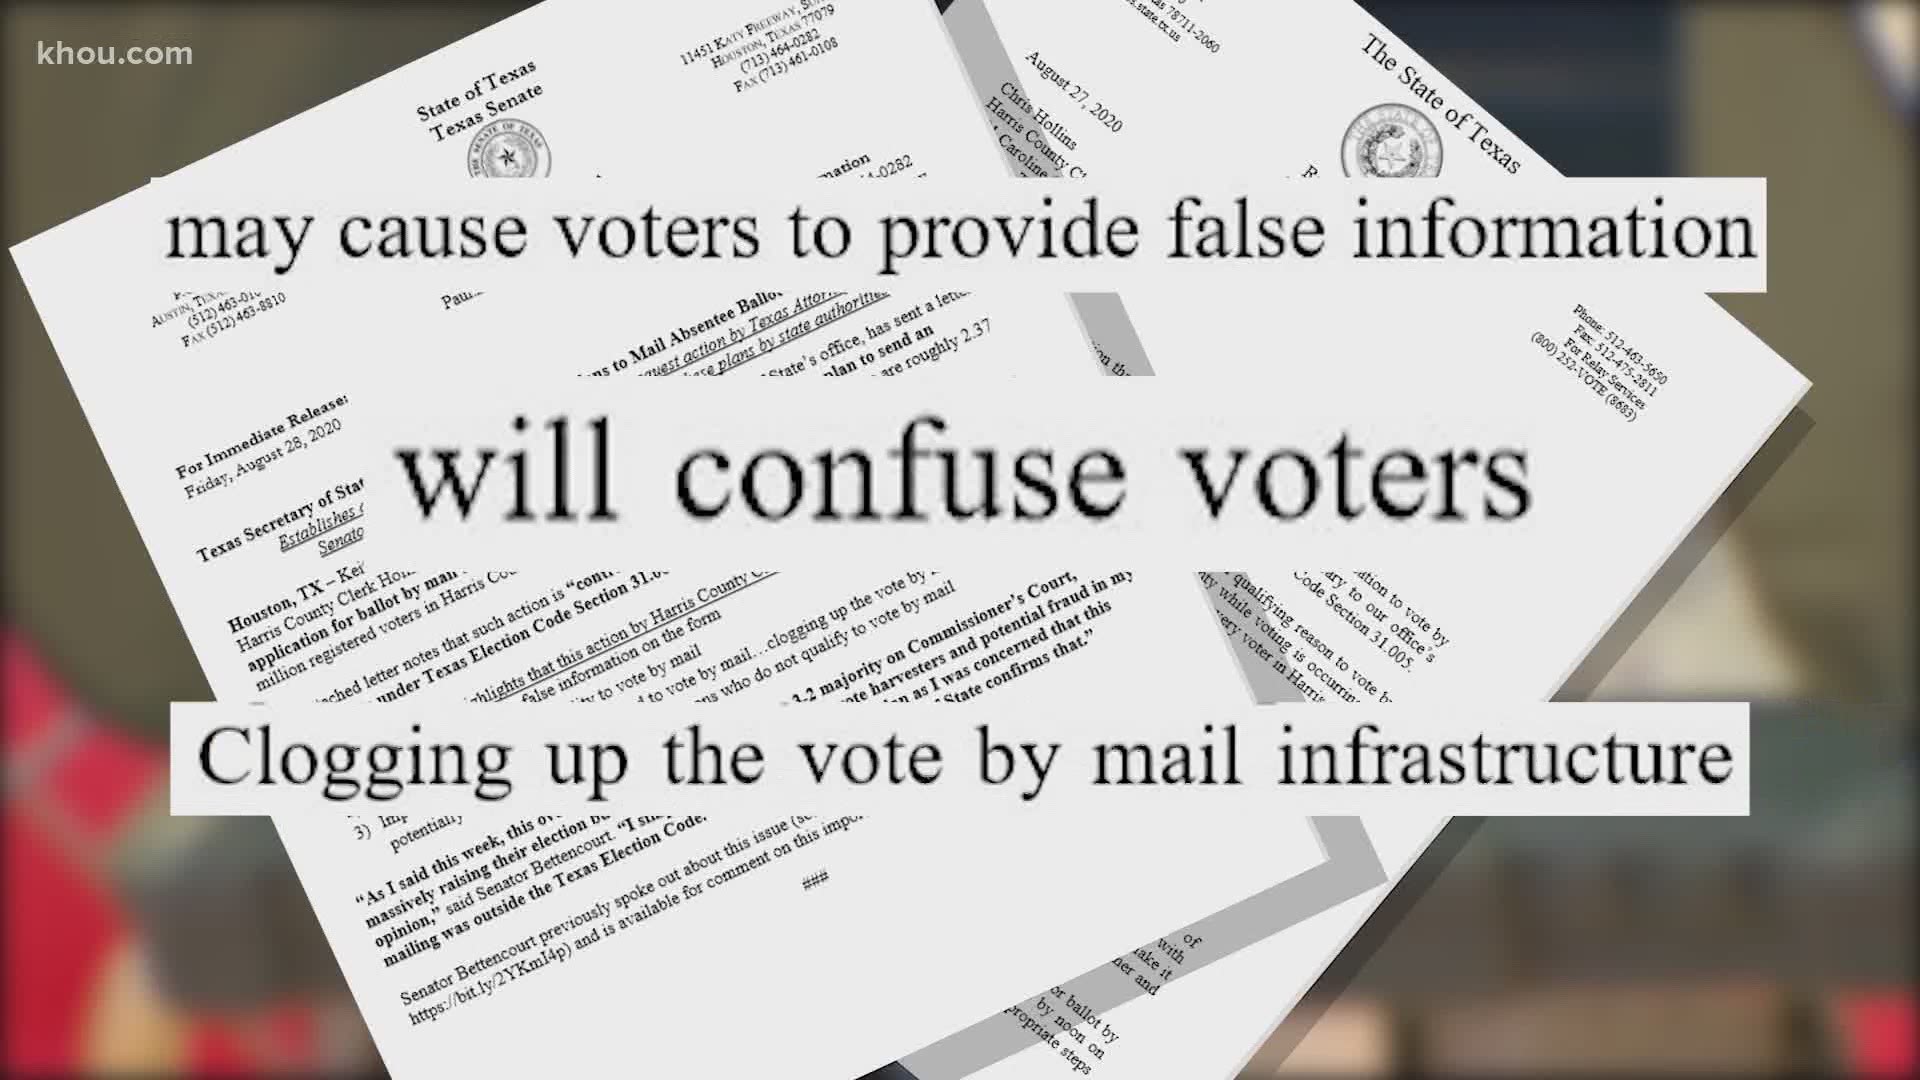 State officials say Harris Co. has until Monday, Aug. 31 to drop a plan to send mail-in ballot applications to all of its more than 2 million registered voters.